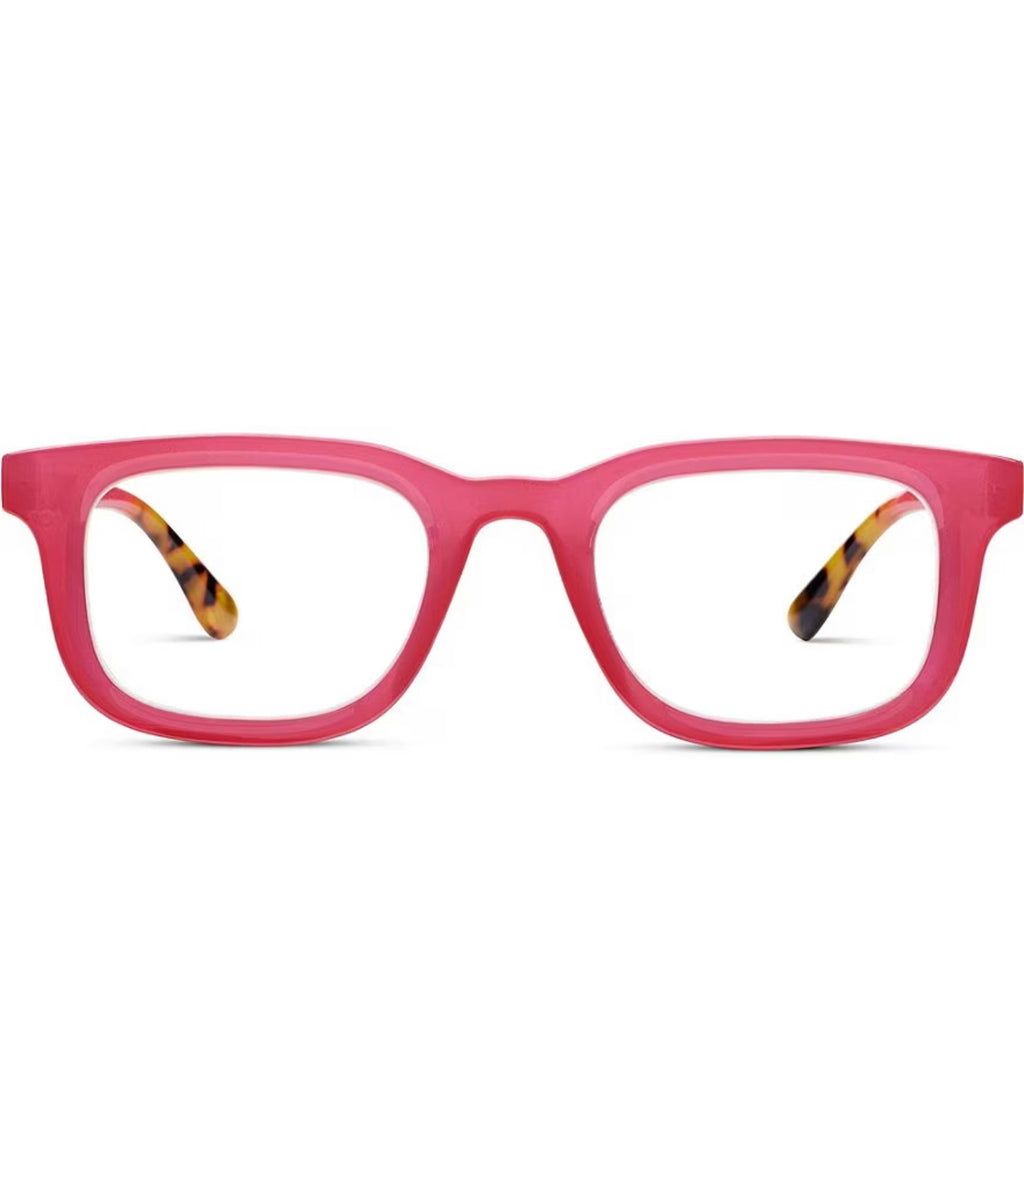 Peepers Readers - Canopy - Pink (with Blue Light Focus™ Eyewear Lenses)